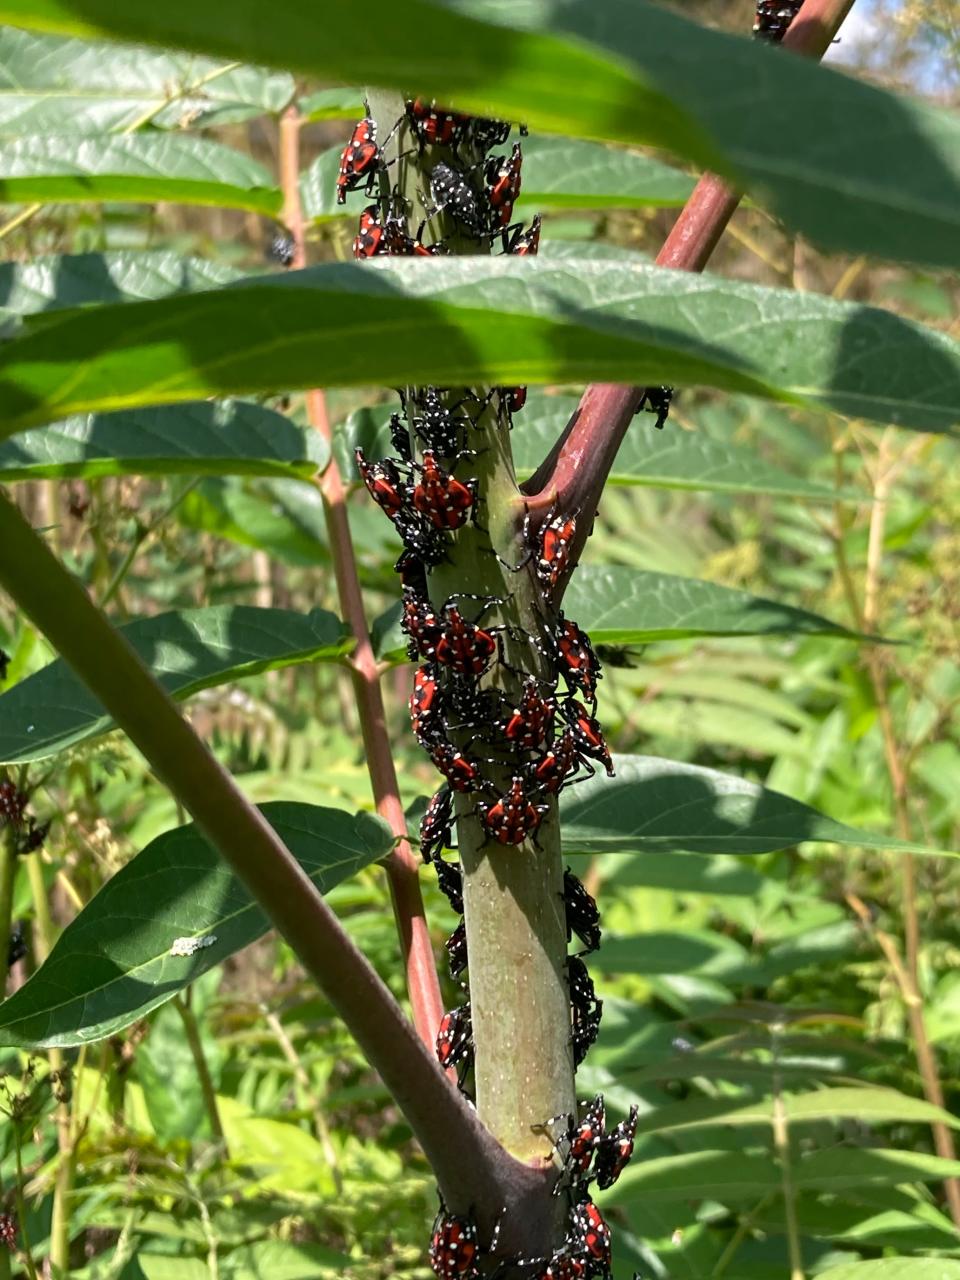 These spotted lanternflies were recently found in the Toledo area.